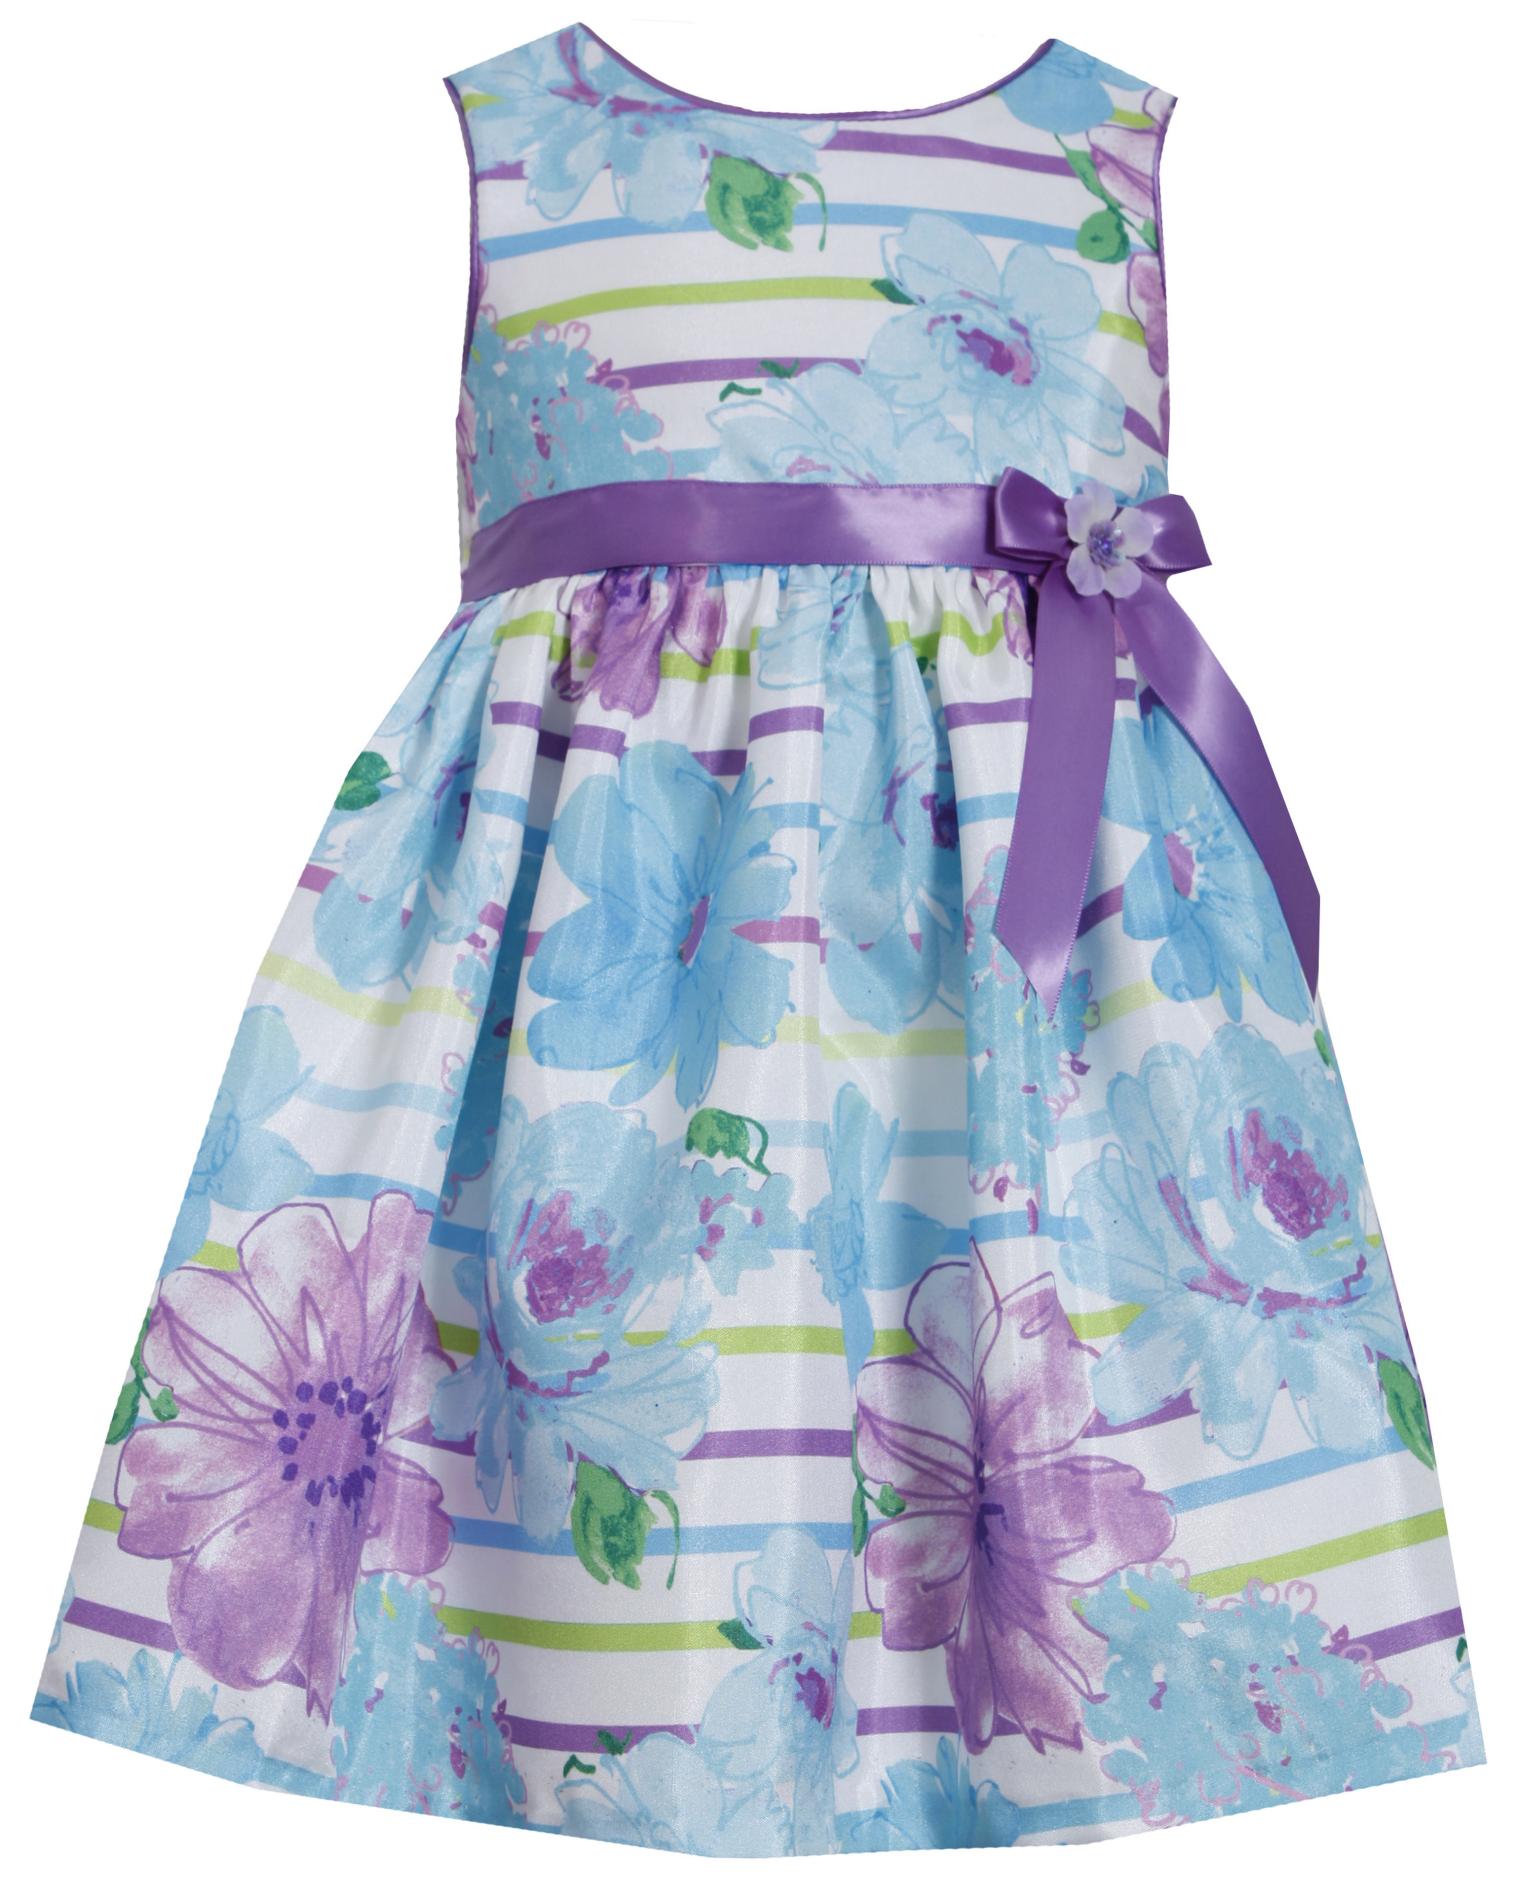 Ashley Ann Infant & Toddler Girl's Pleated Party Dress - Stripes & Flowers